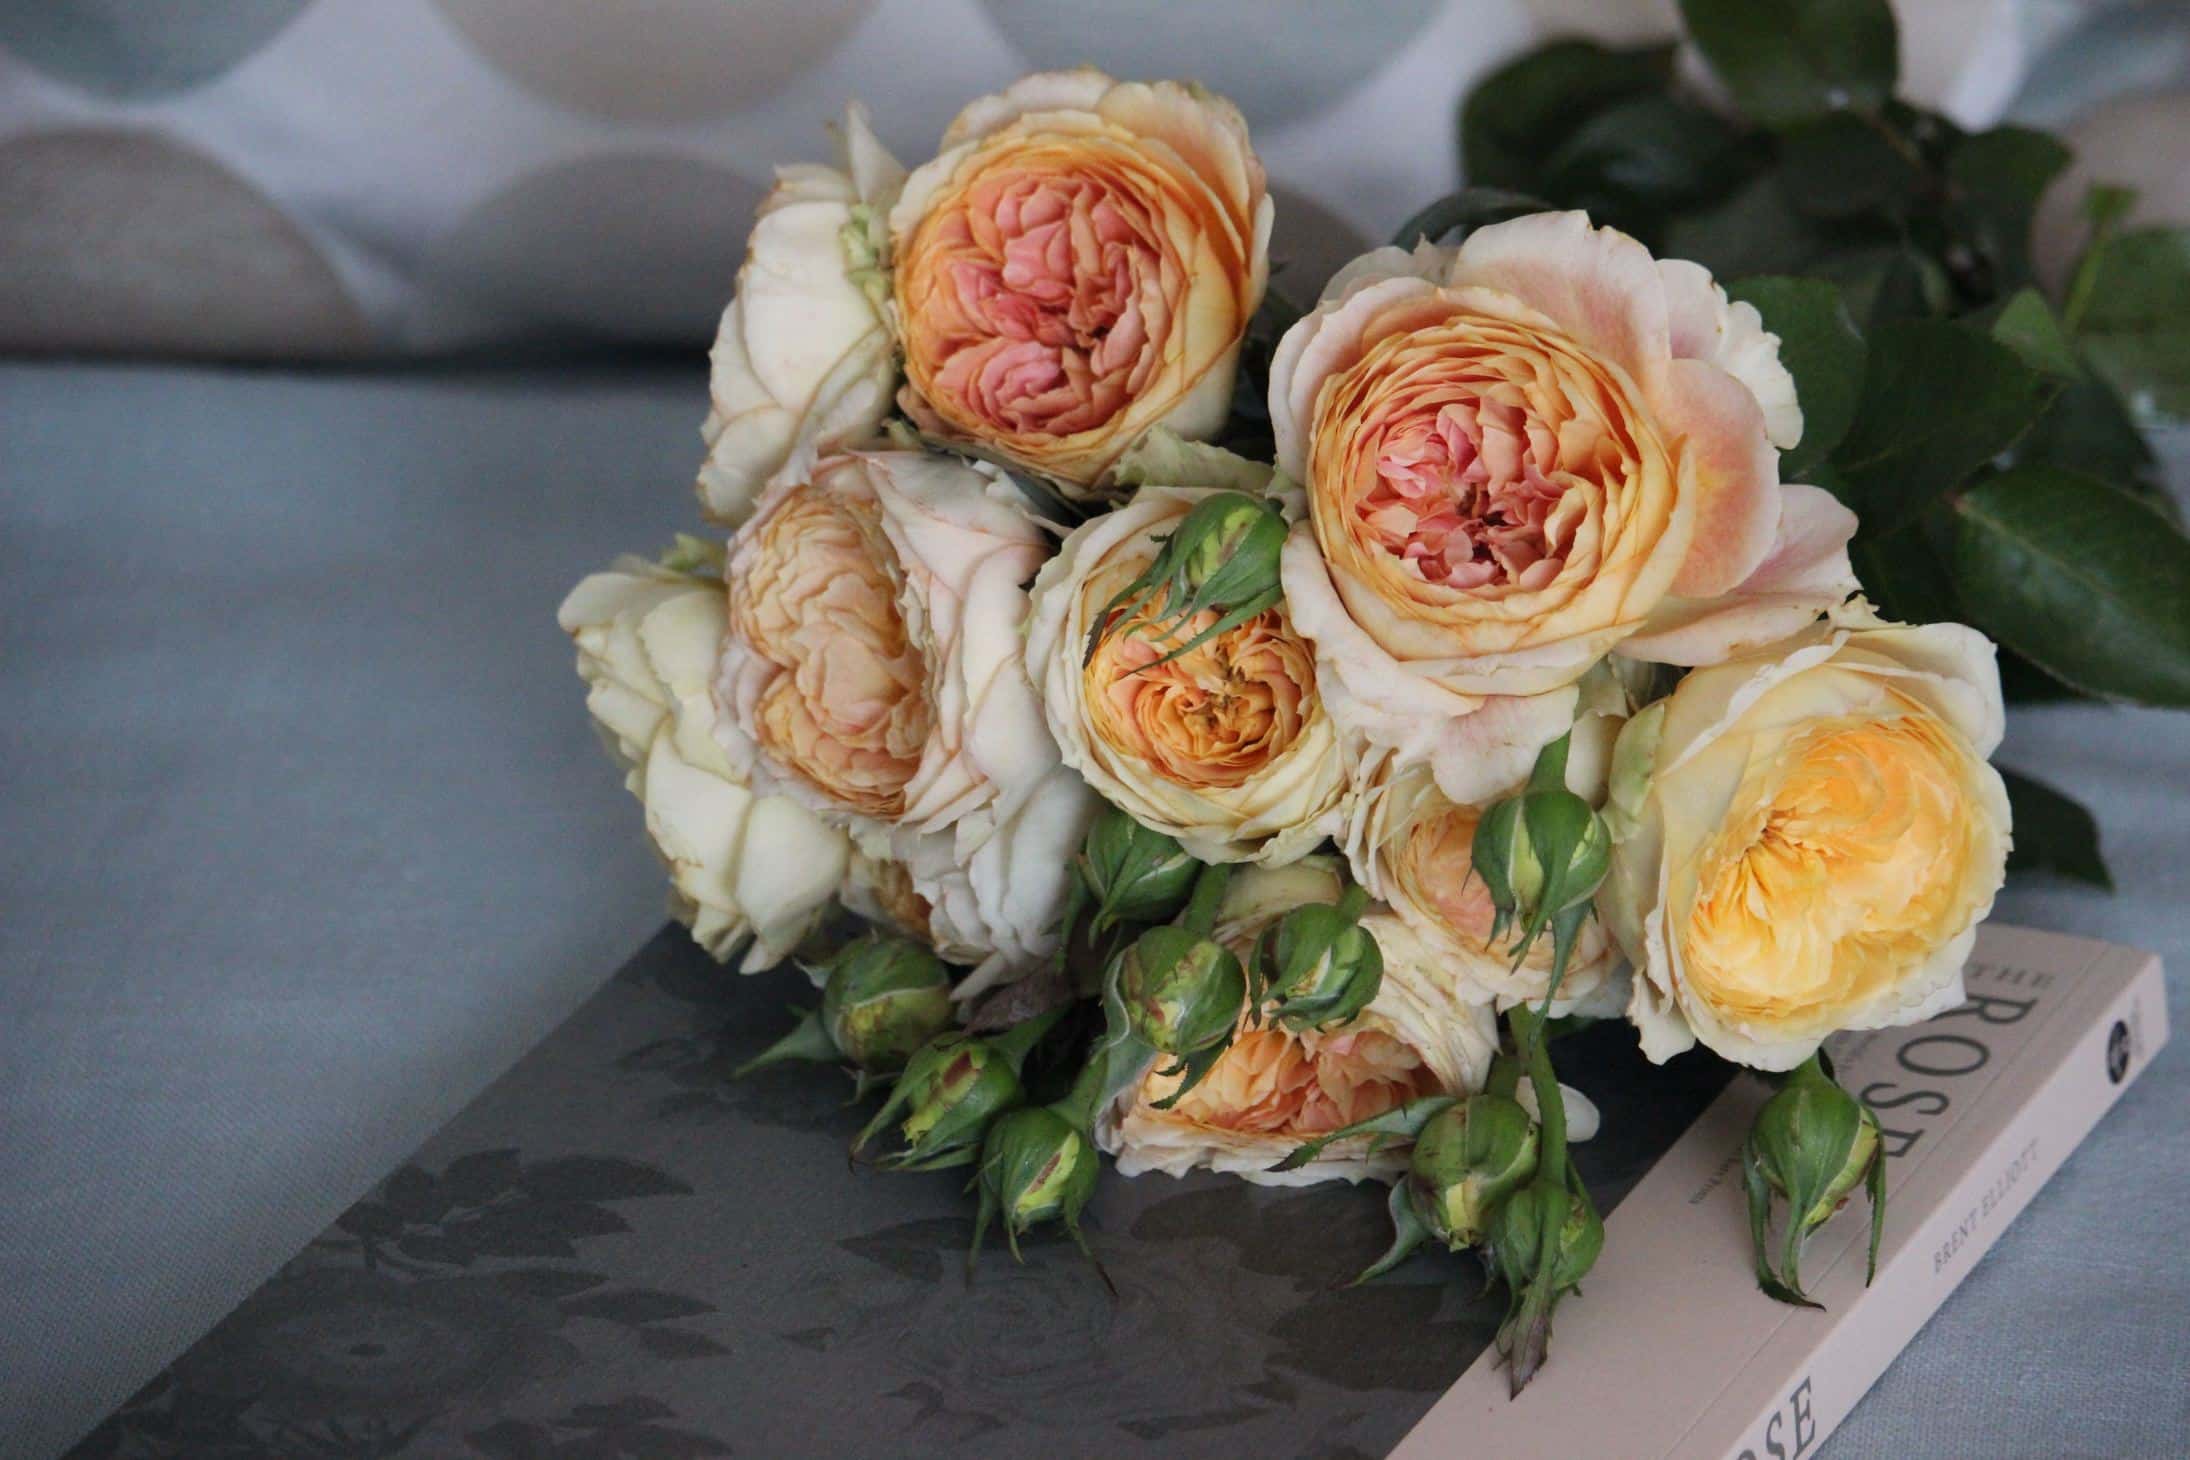 5-selection-of-mood-boosting-flowers-for-your-house-room-garden-roses-bedroom